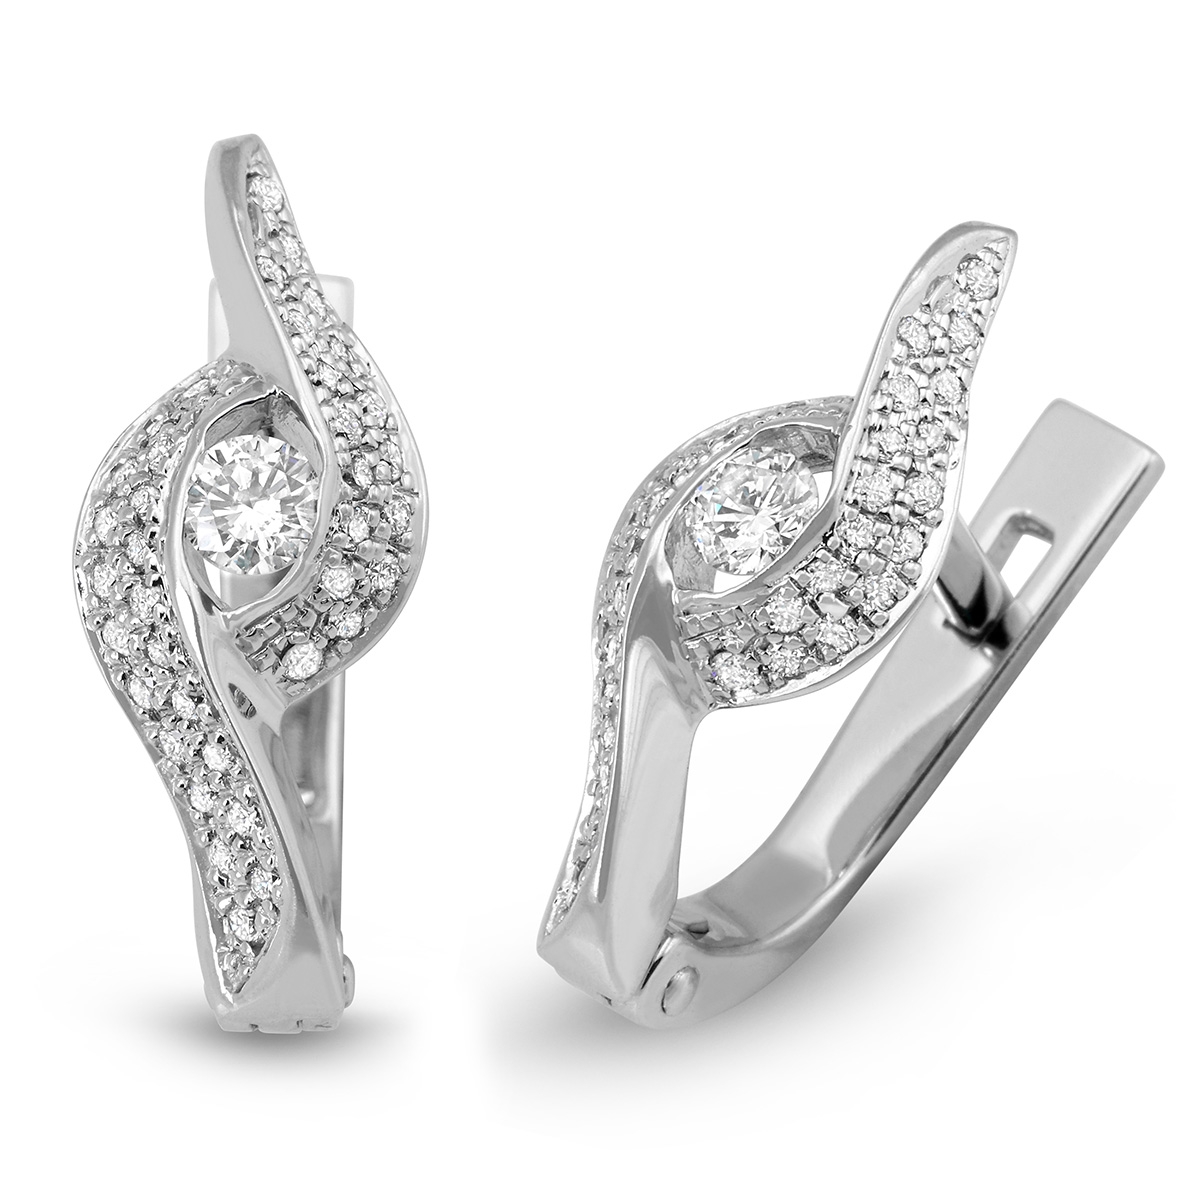 Anbinder Jewelry 14 White Gold Knot Earrings with Diamonds - 1